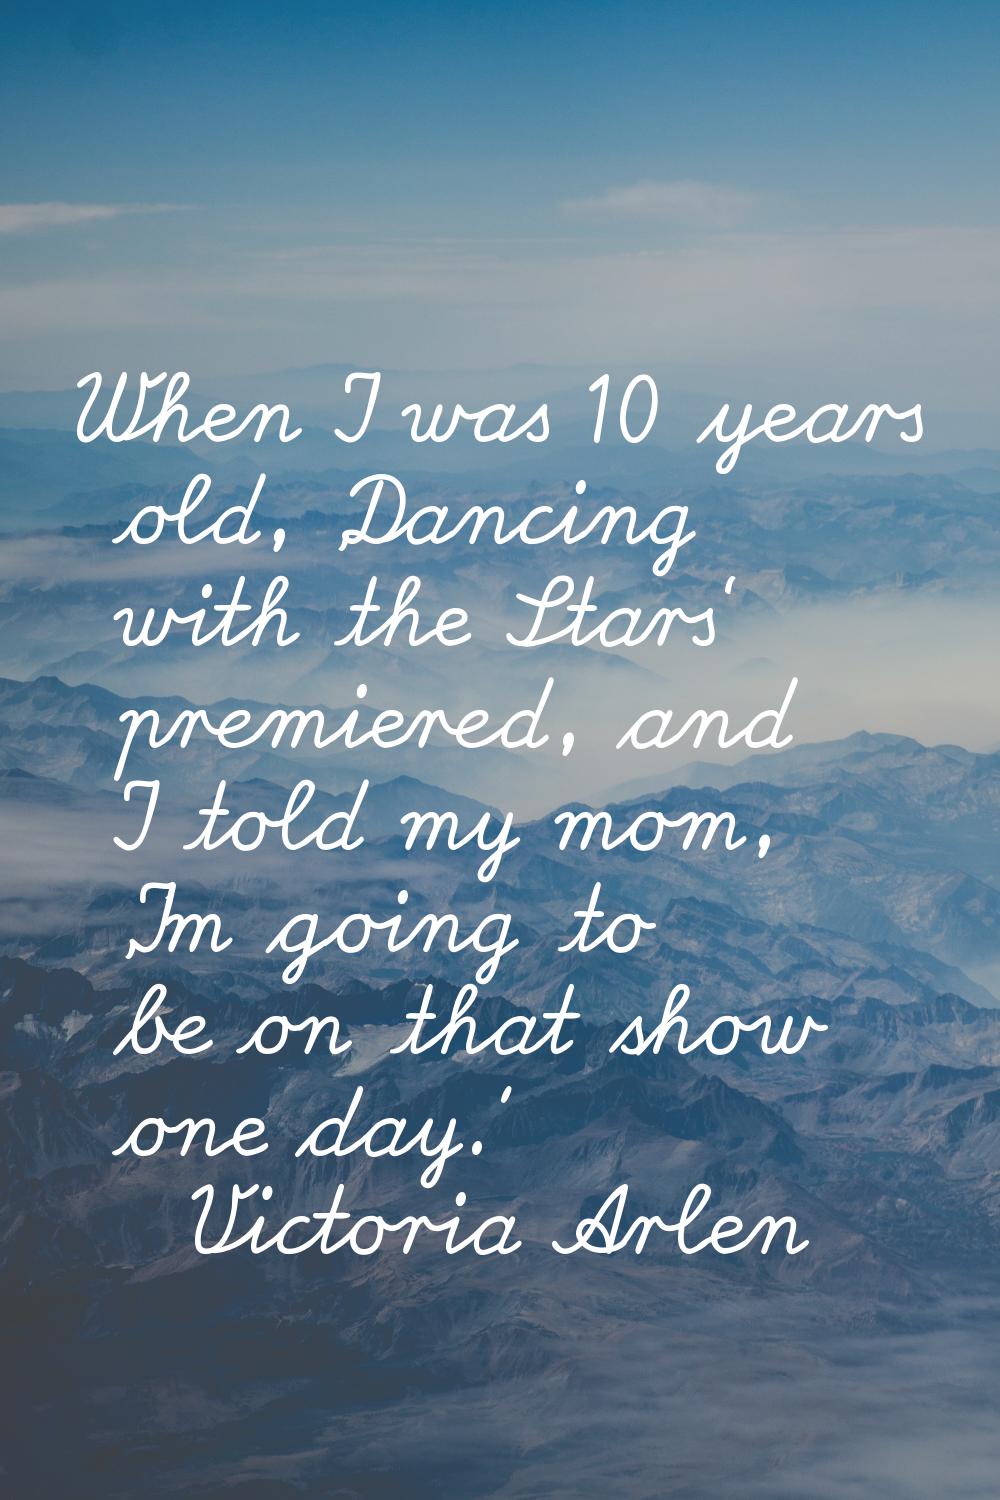 When I was 10 years old, 'Dancing with the Stars' premiered, and I told my mom, 'I'm going to be on